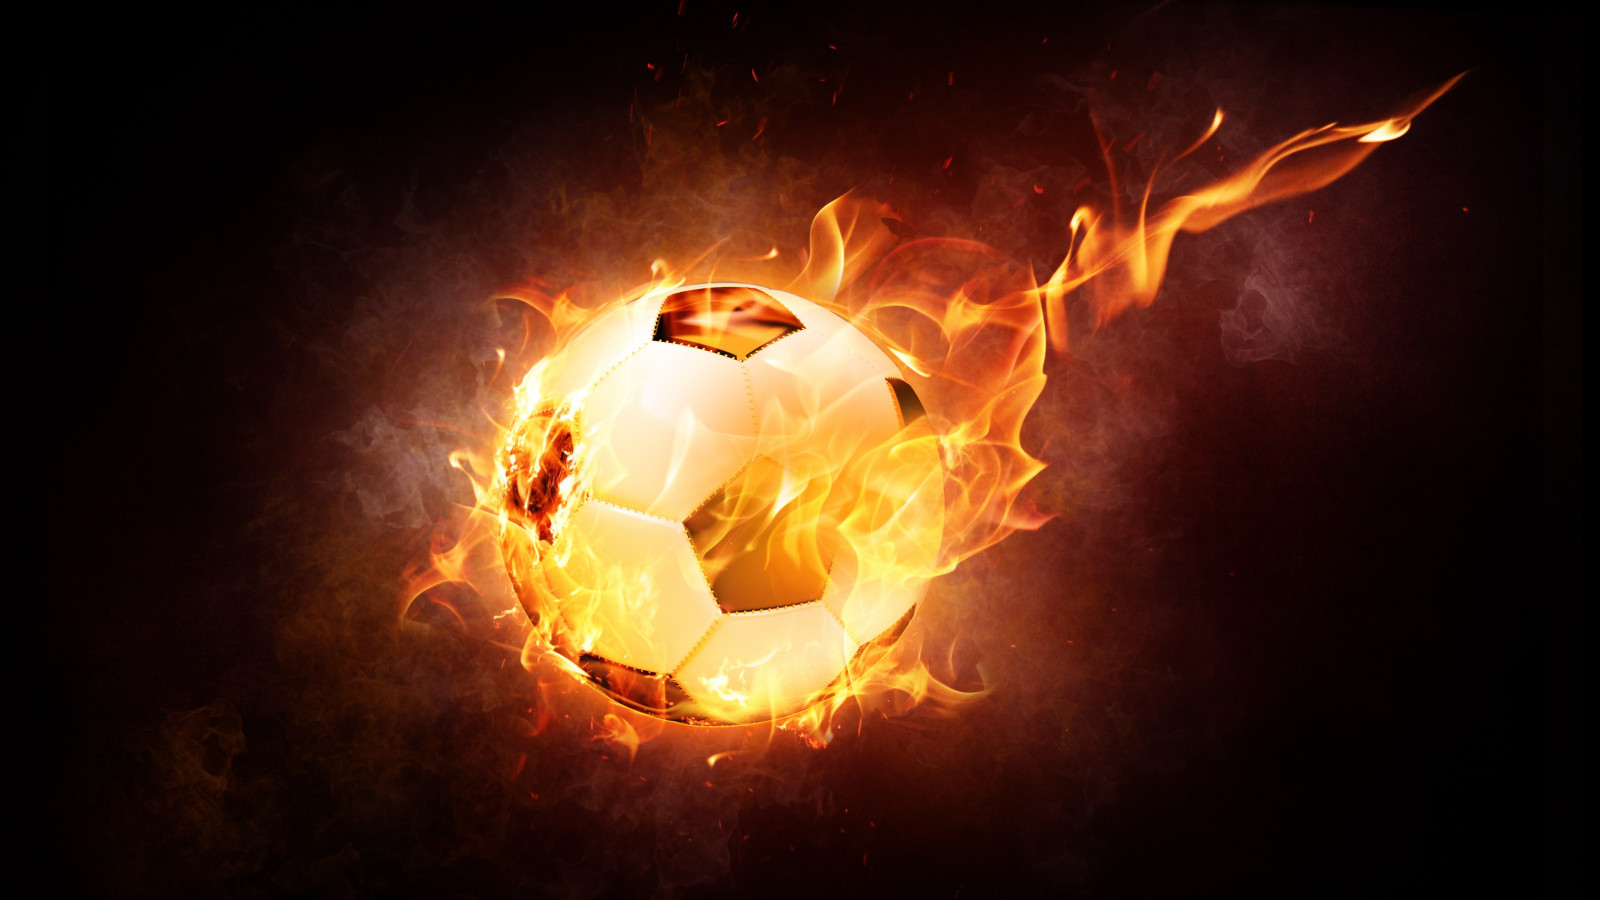 The football ball is on fire wallpaper 1600x900